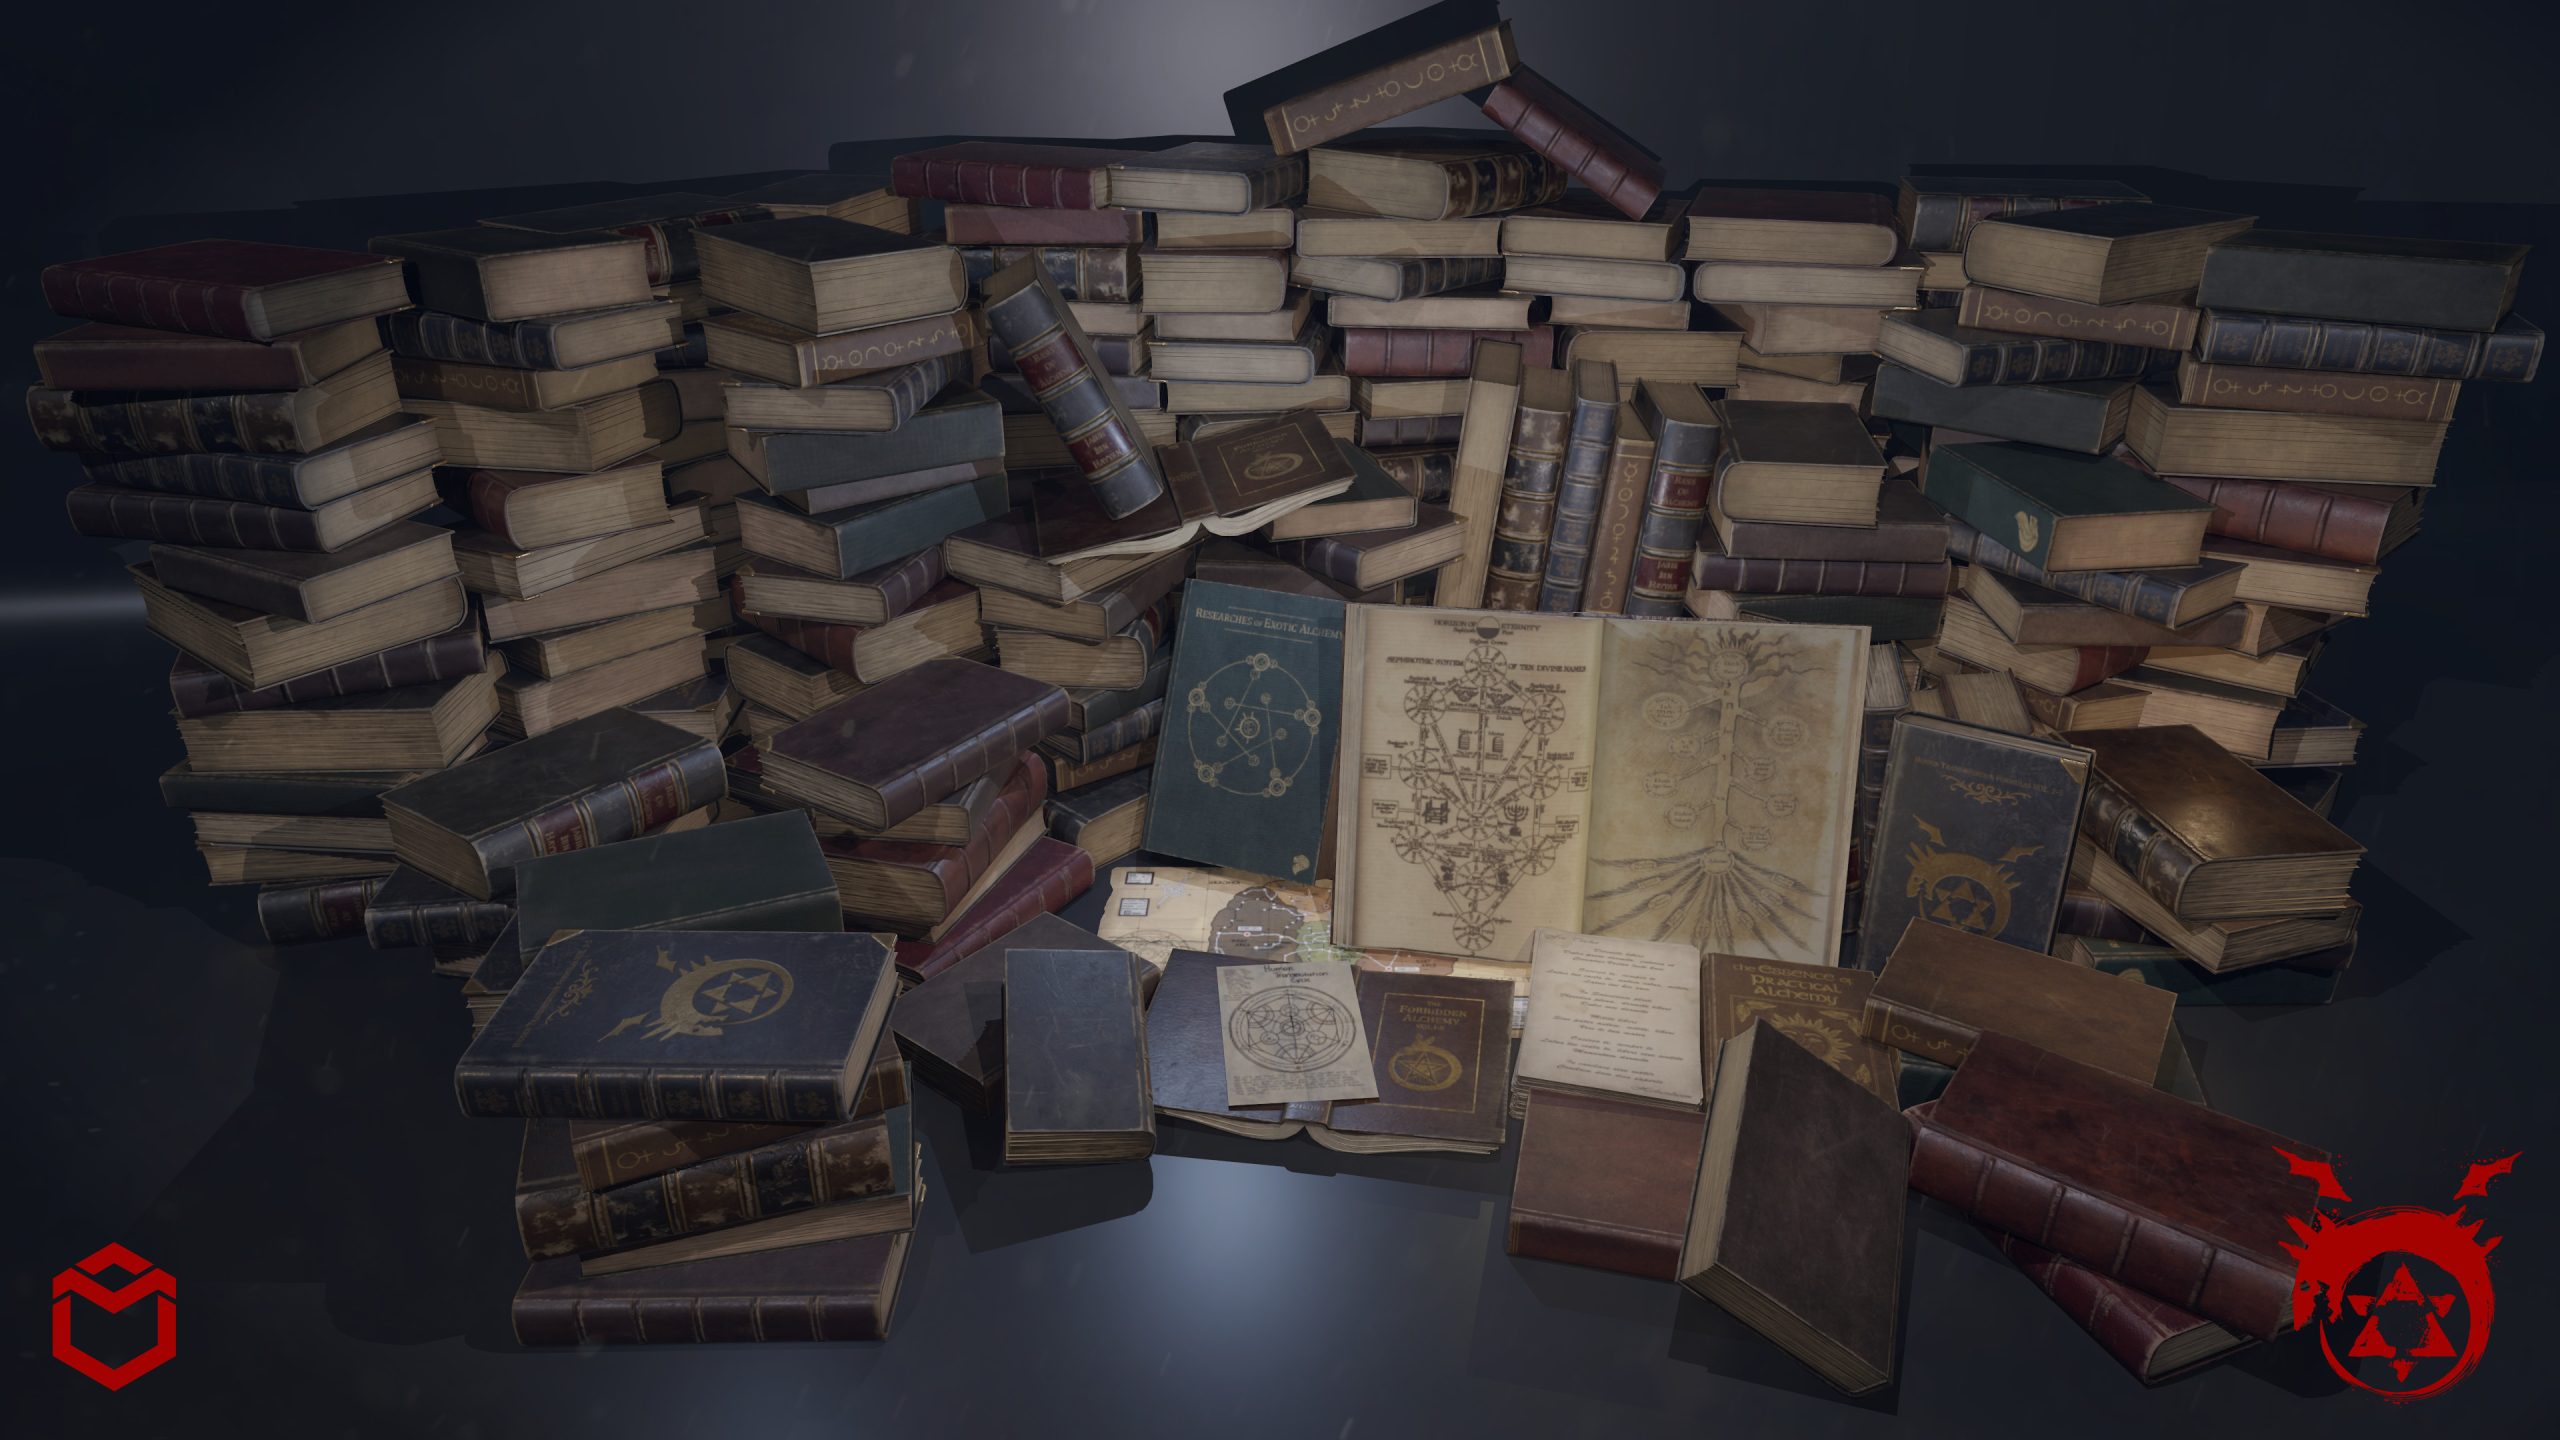 FMA | Old Alchemy Books by Mohamed El Bouhy at ArtStation